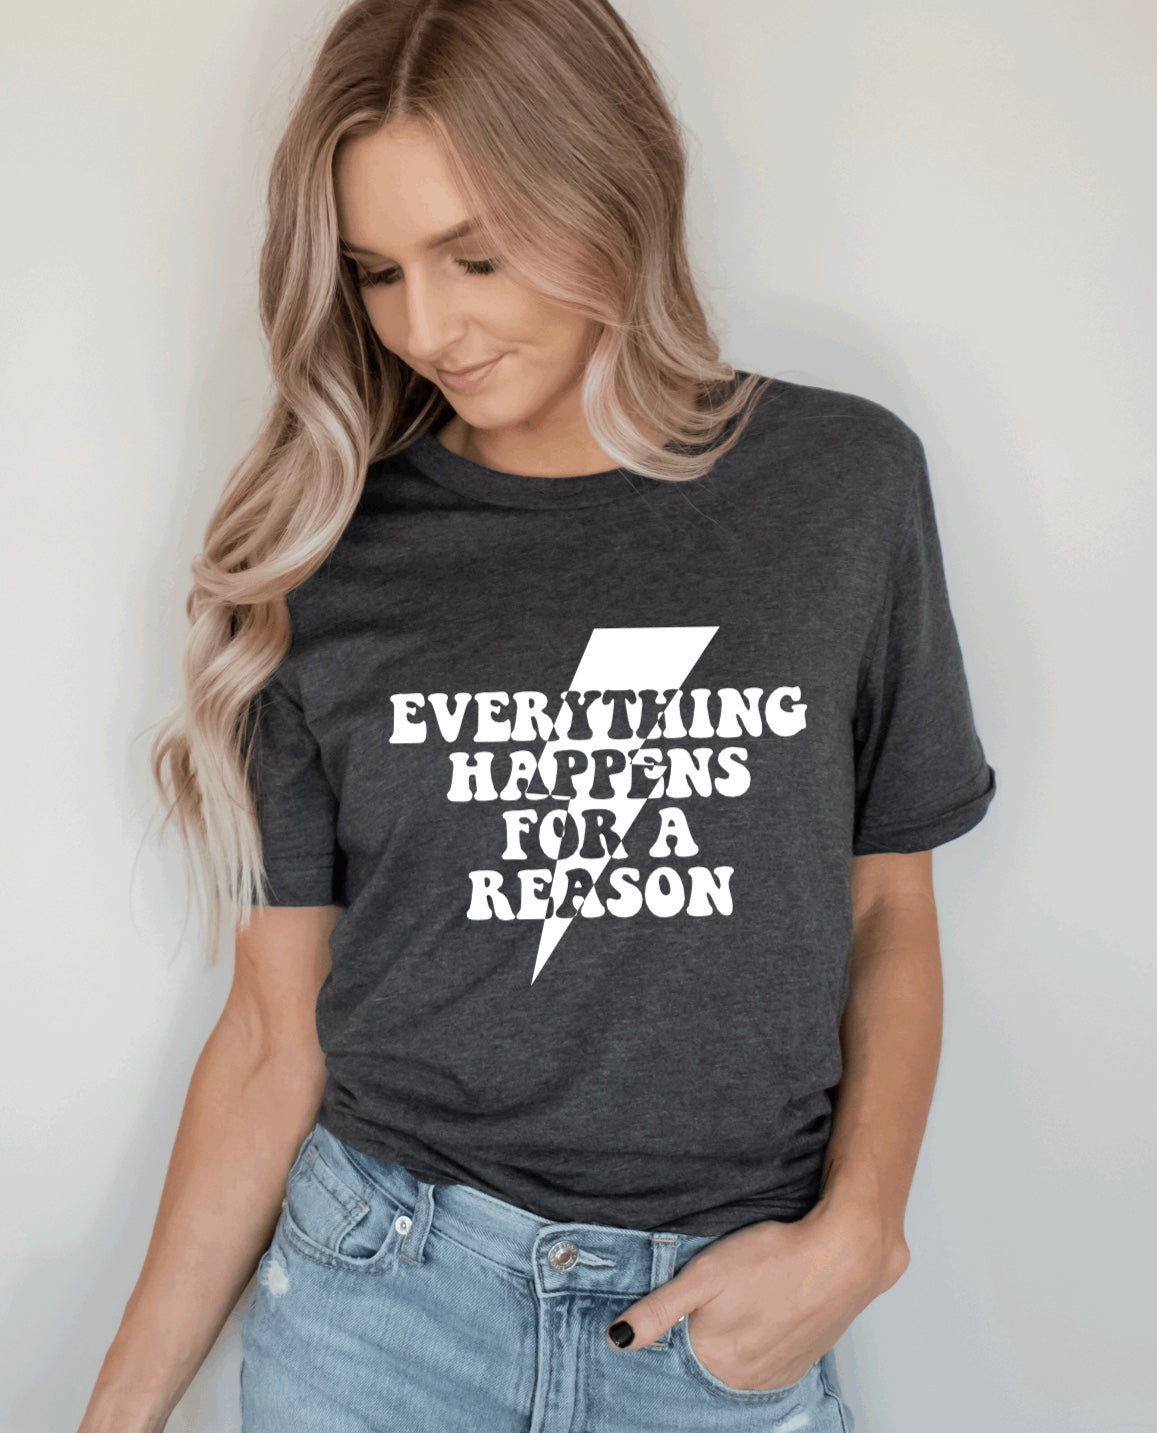 Everything happens for a reason t-shirt